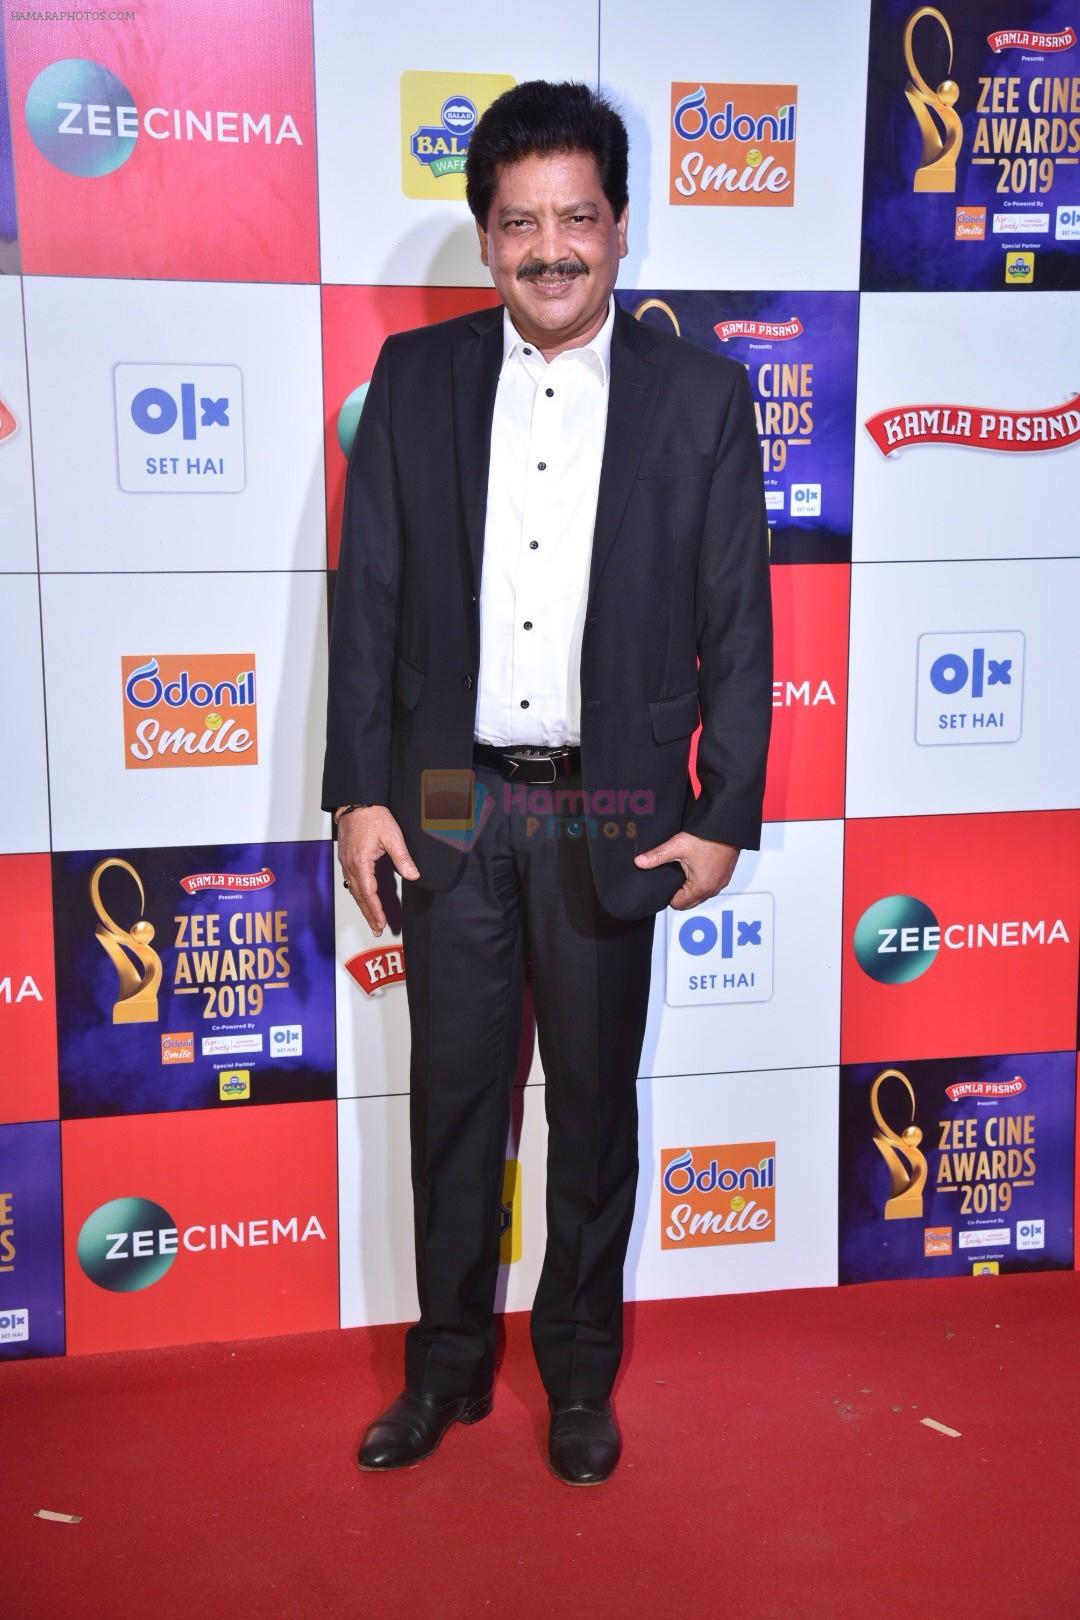 Udit Narayan at Zee cine awards red carpet on 19th March 2019